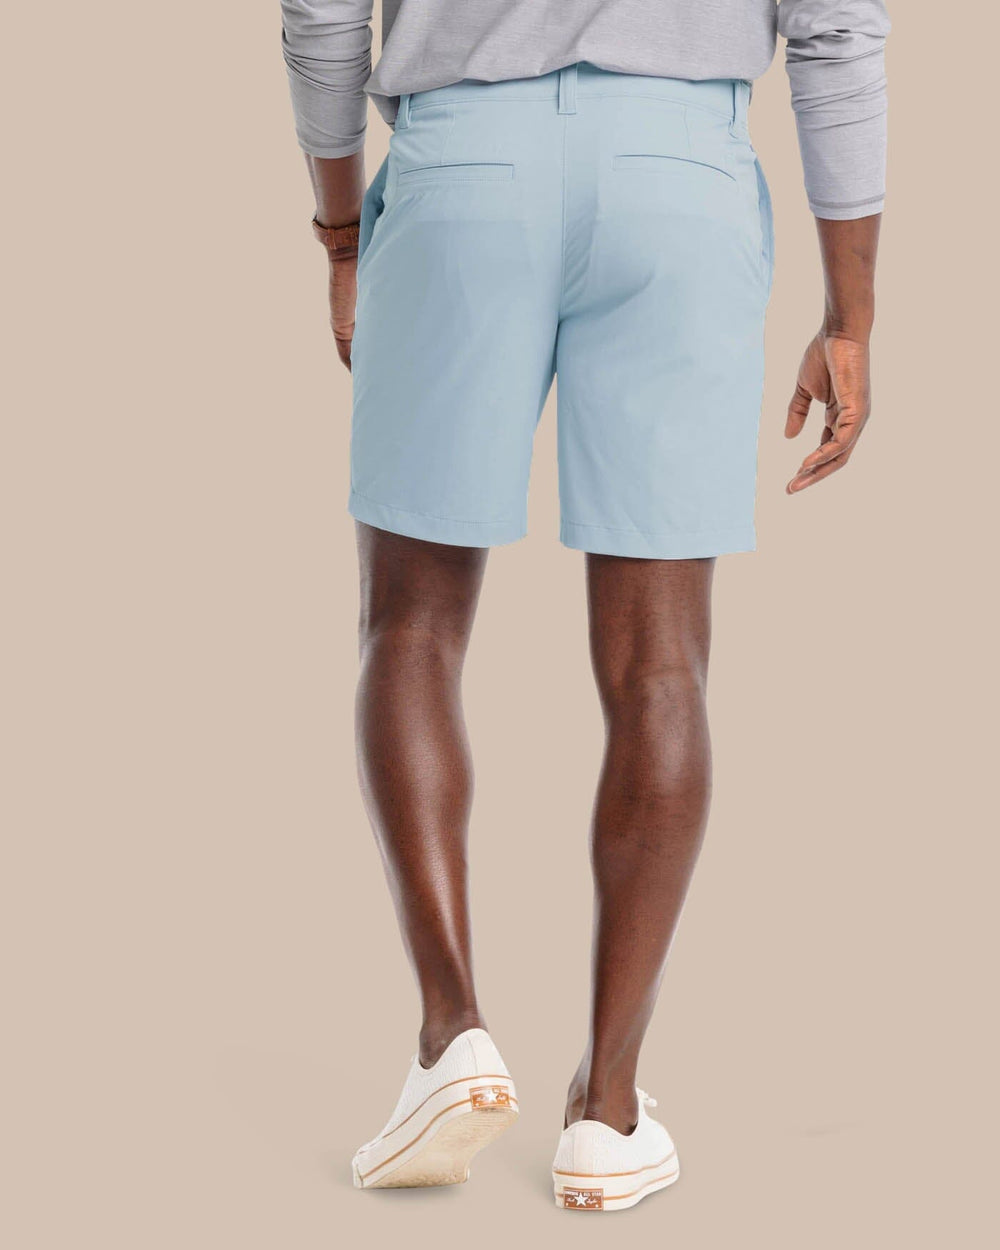 The back view of the Southern Tide gulf 8 inch brrr die performance short by Southern Tide - Fog